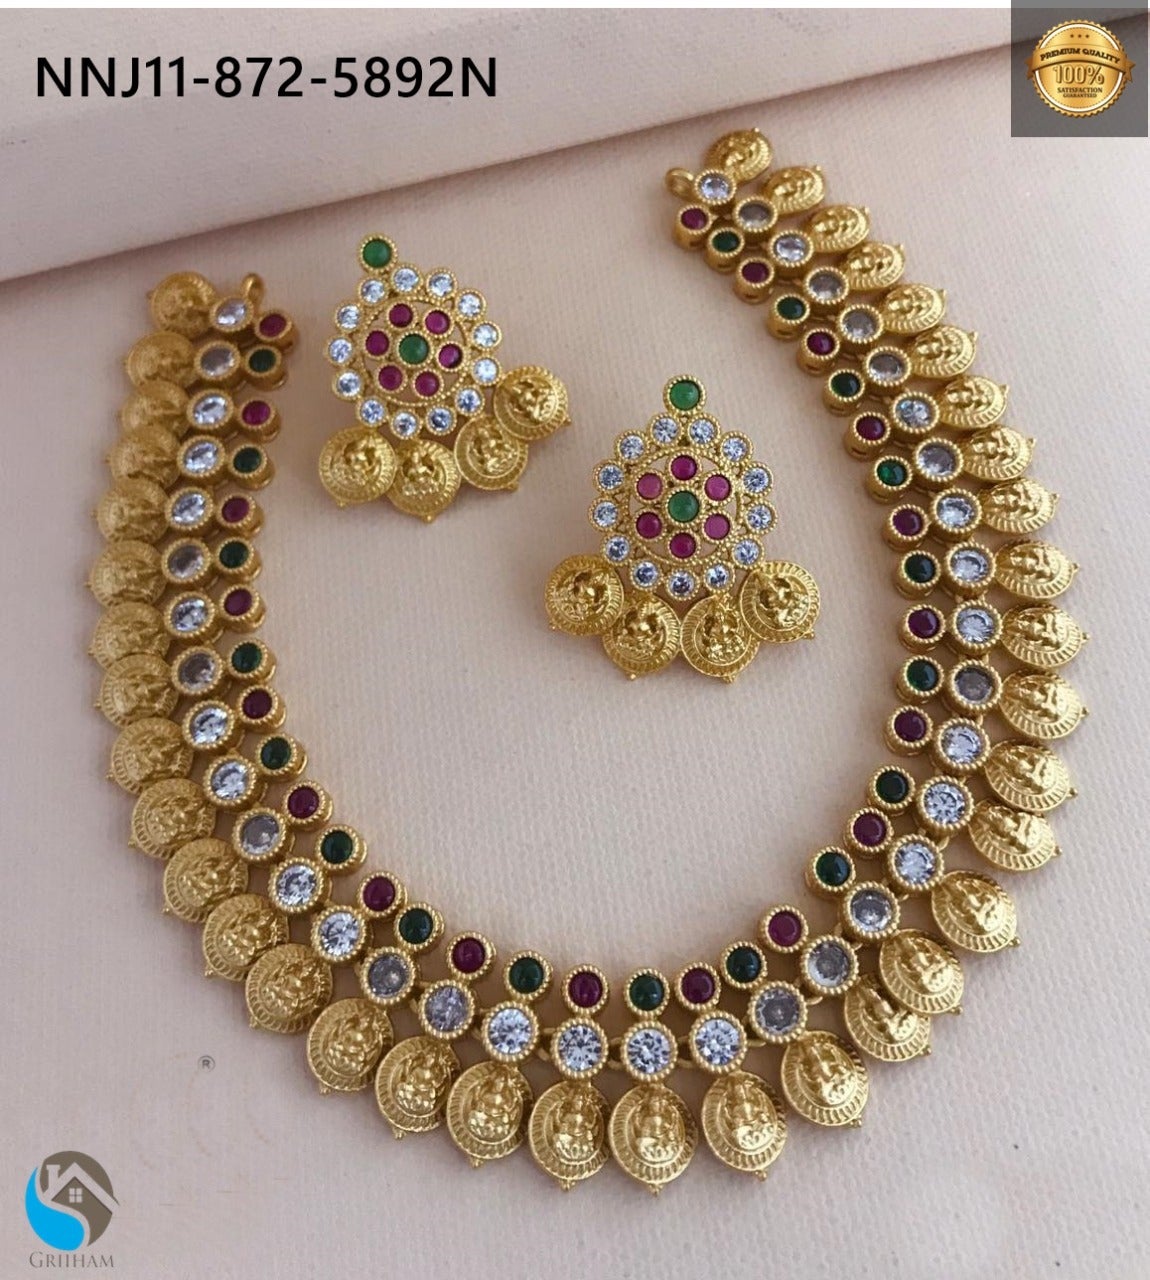 Premium Gold Finish High Quality Short Necklace Set with AD stones for all occasions 5892N